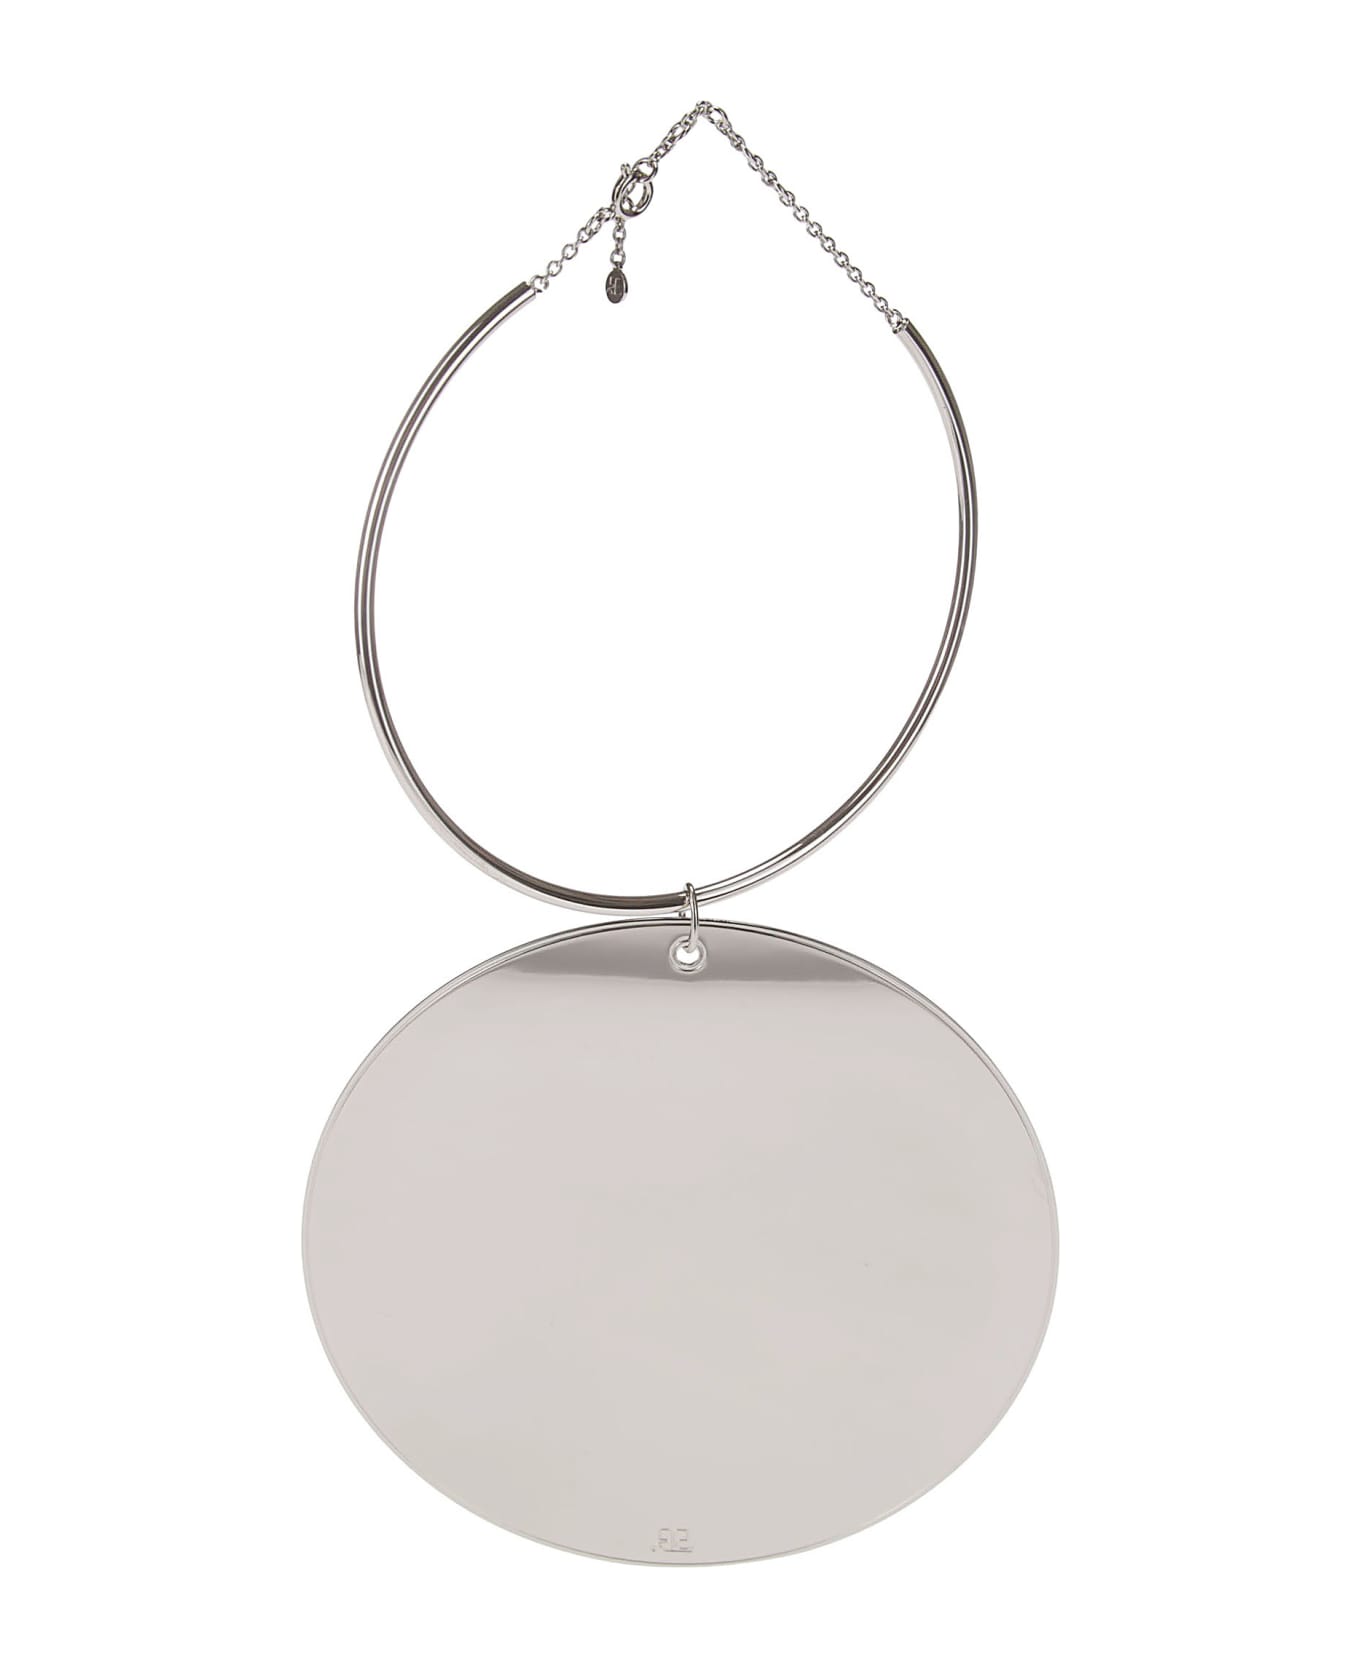 Courrèges Holistic Circle Lacquered Necklace - SILVER ネックレス